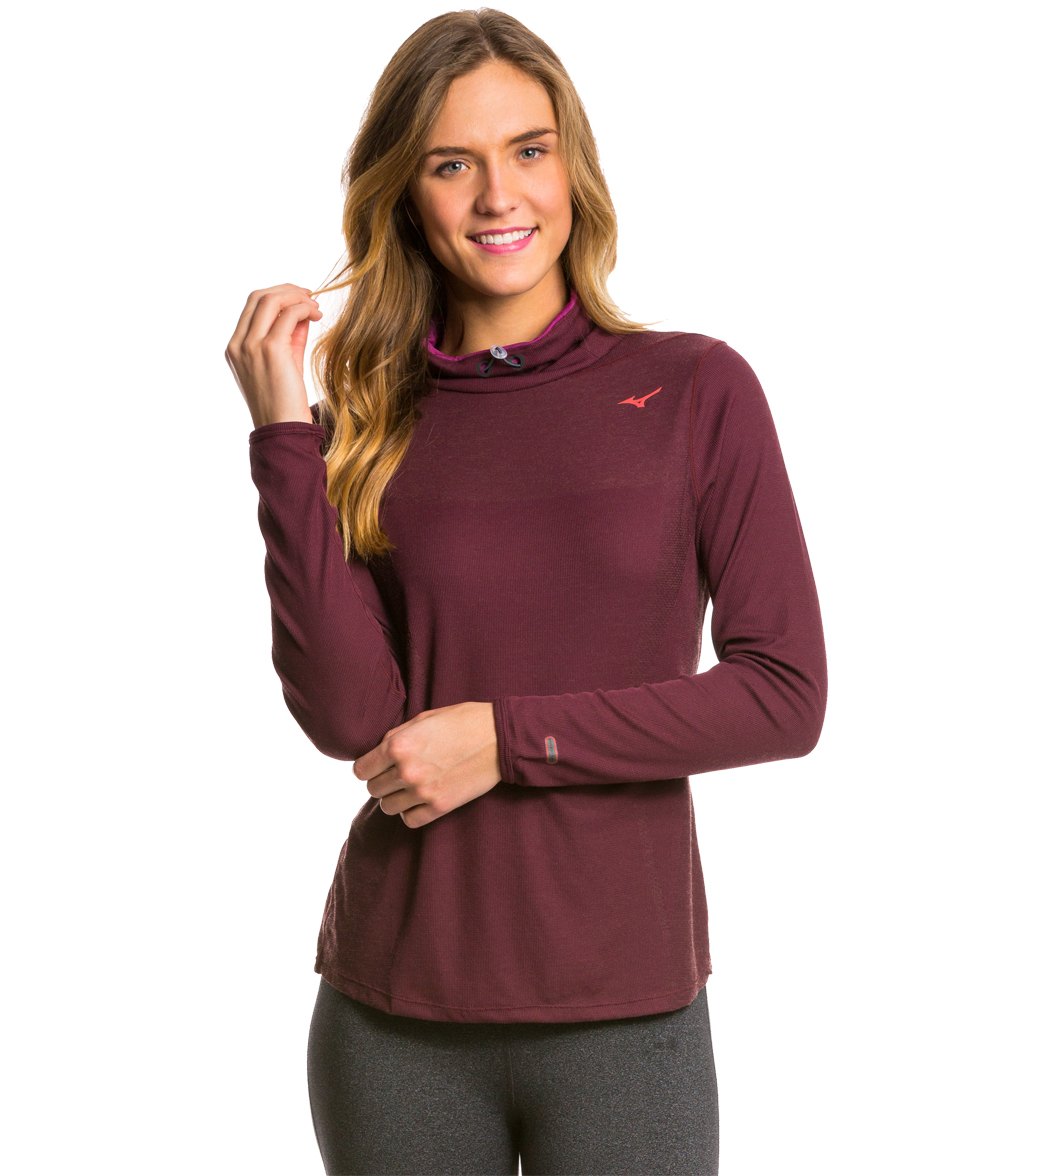 Mizuno Women's Breath Thermo Body Mapping Cowl Long Sleeve Shirt - Fig/Cayenne Xl - Swimoutlet.com